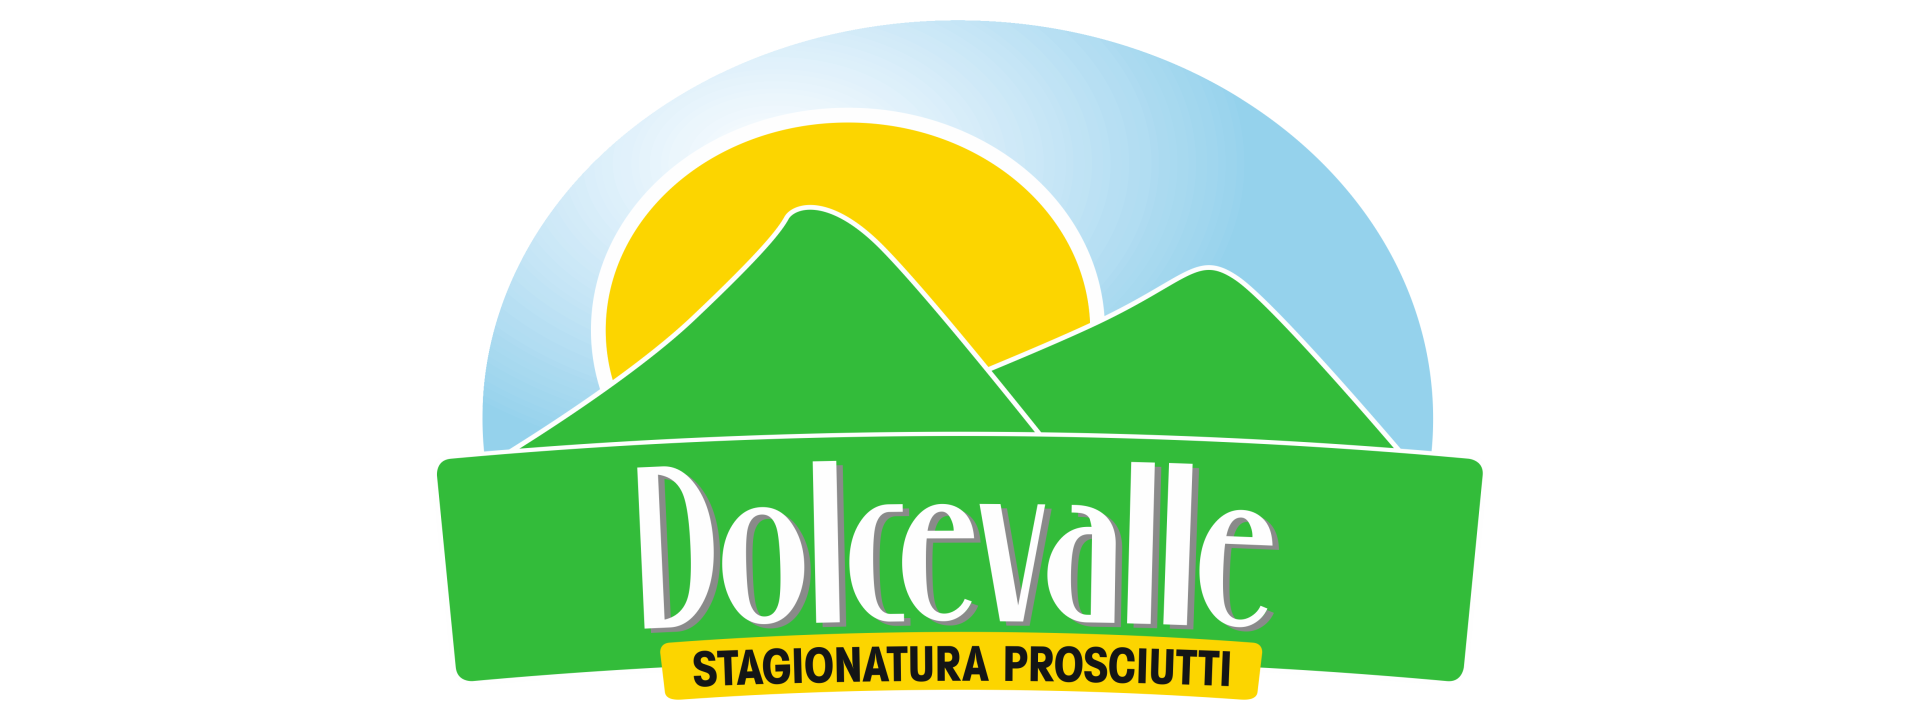 Dolcevalle